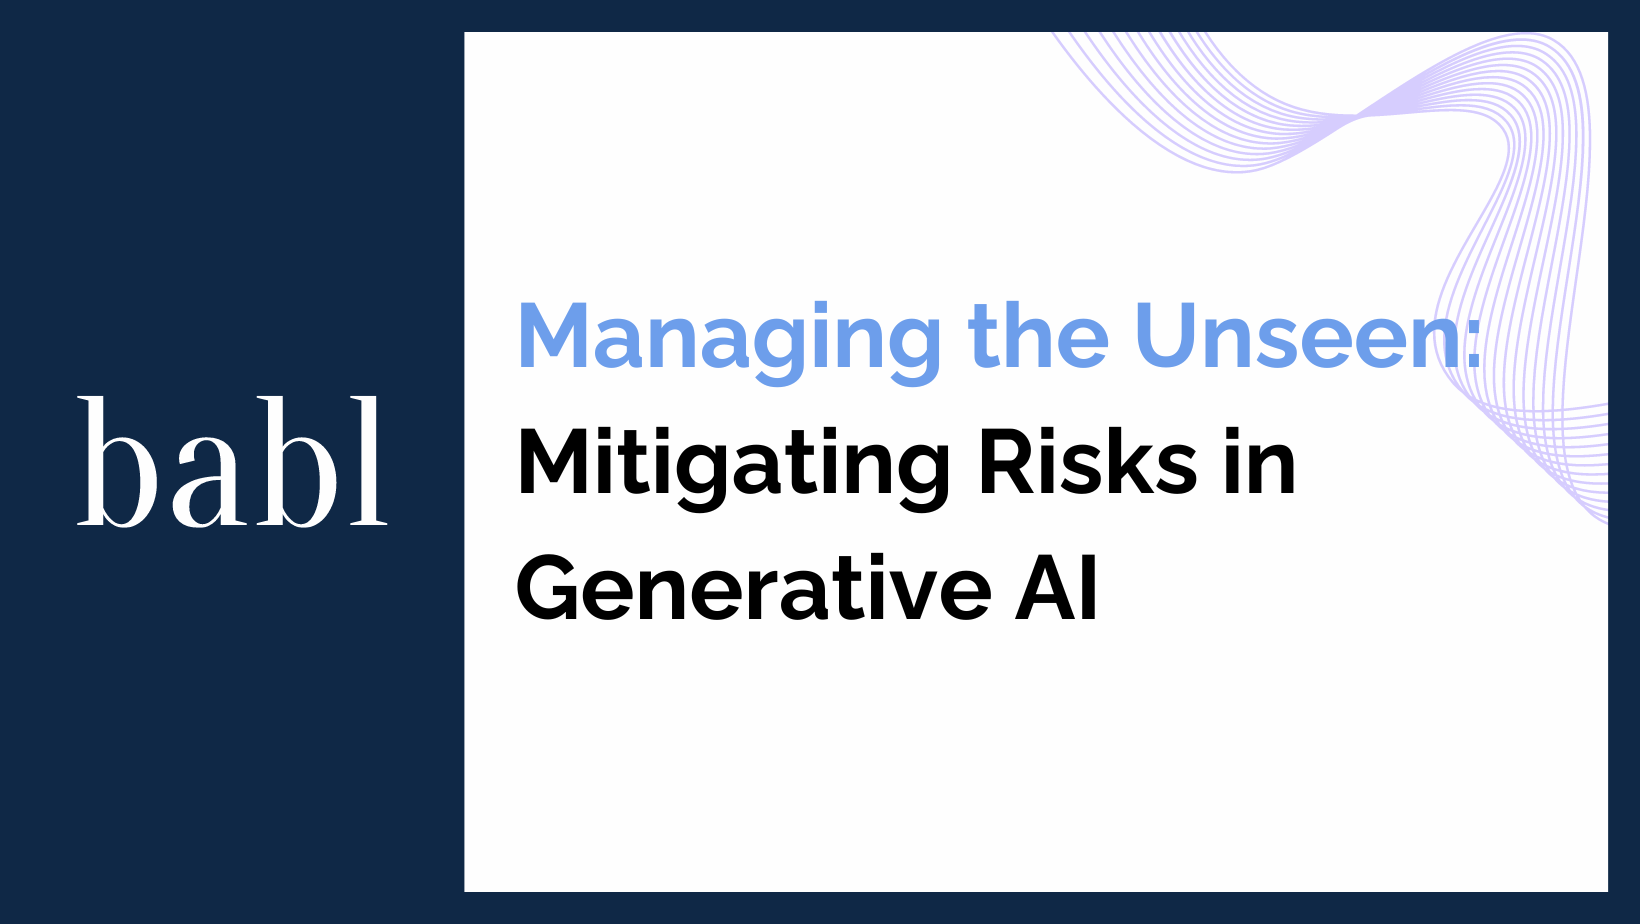 Managing the Unseen: Mitigating Risks in Generative AI